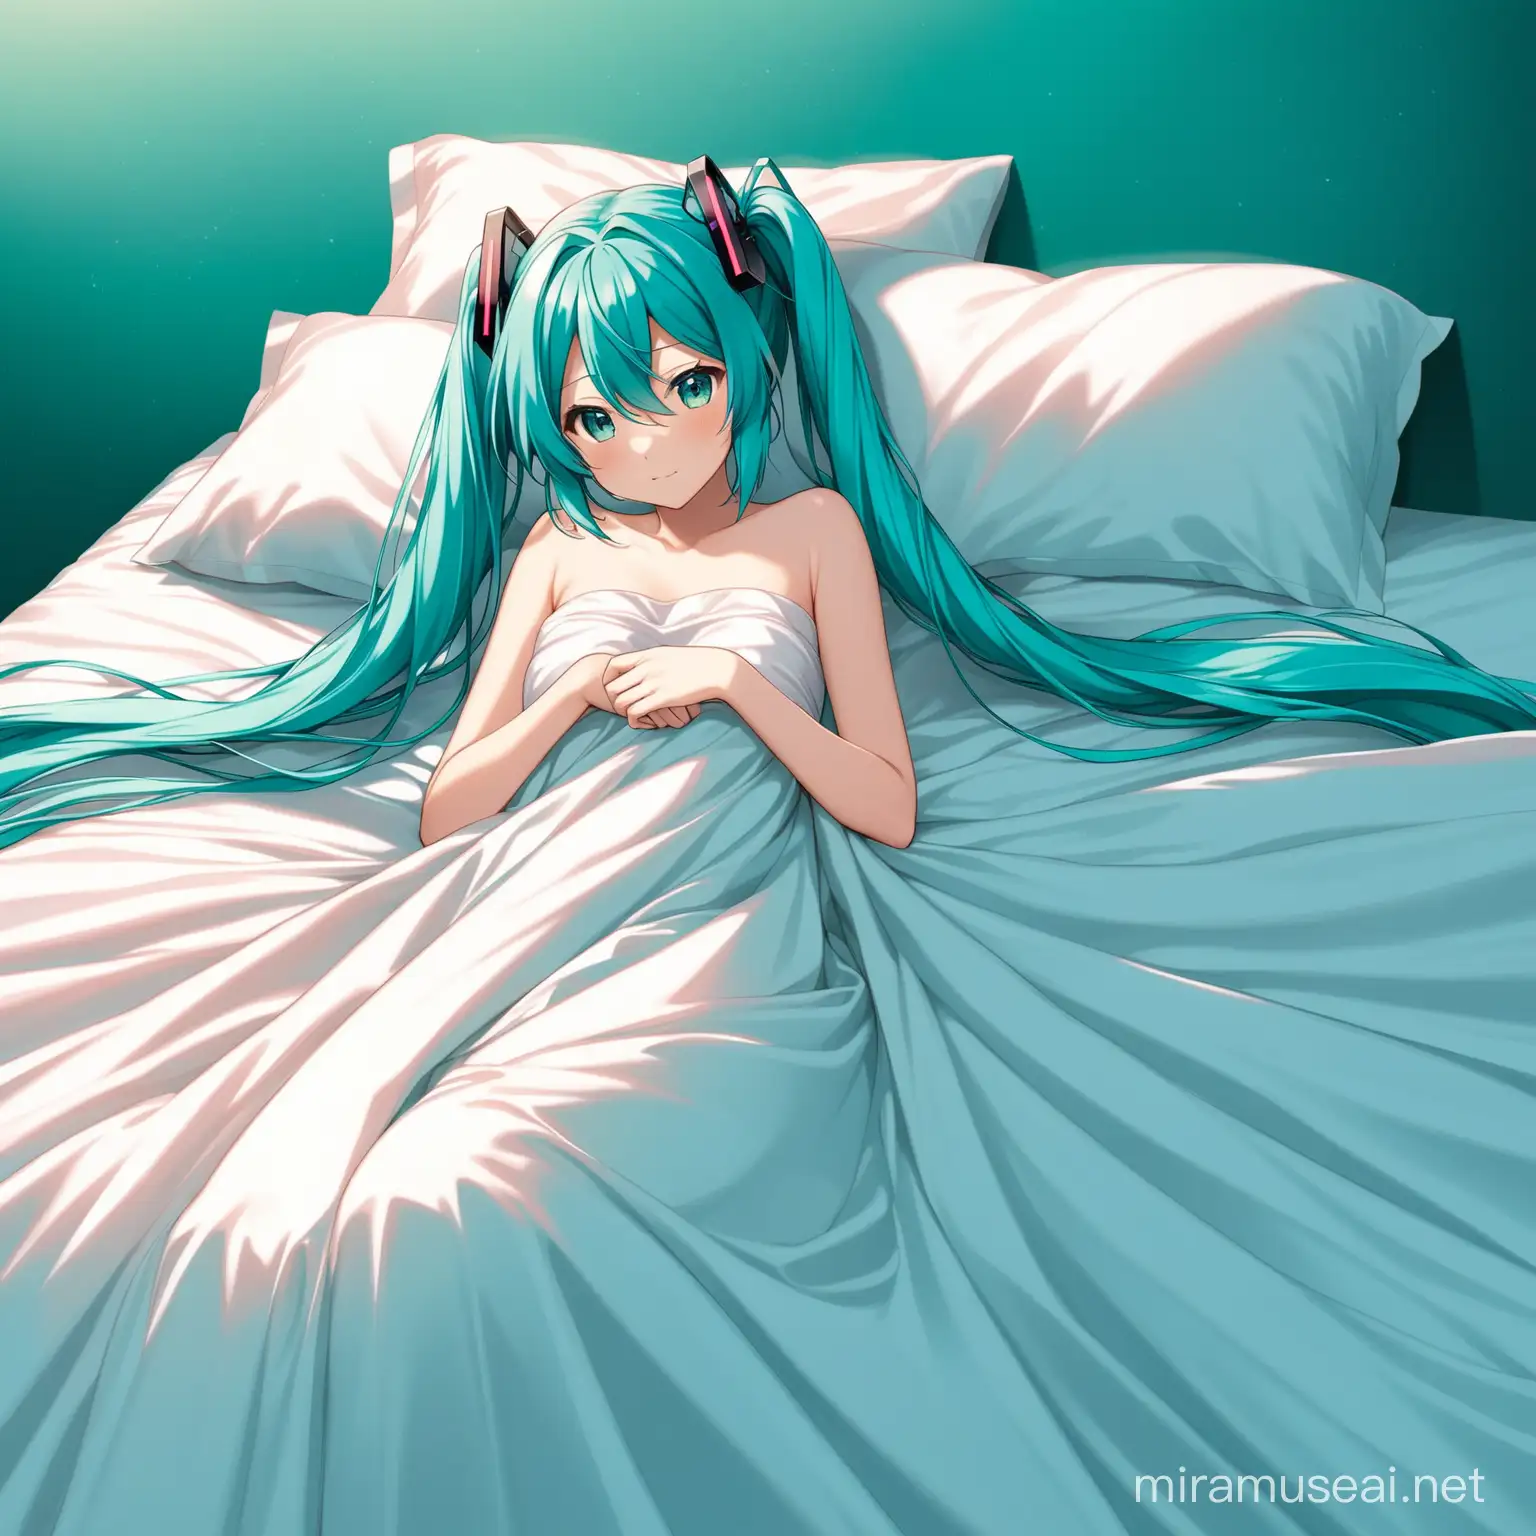 Hatsune Miku Relaxing on Teal Satin Bed